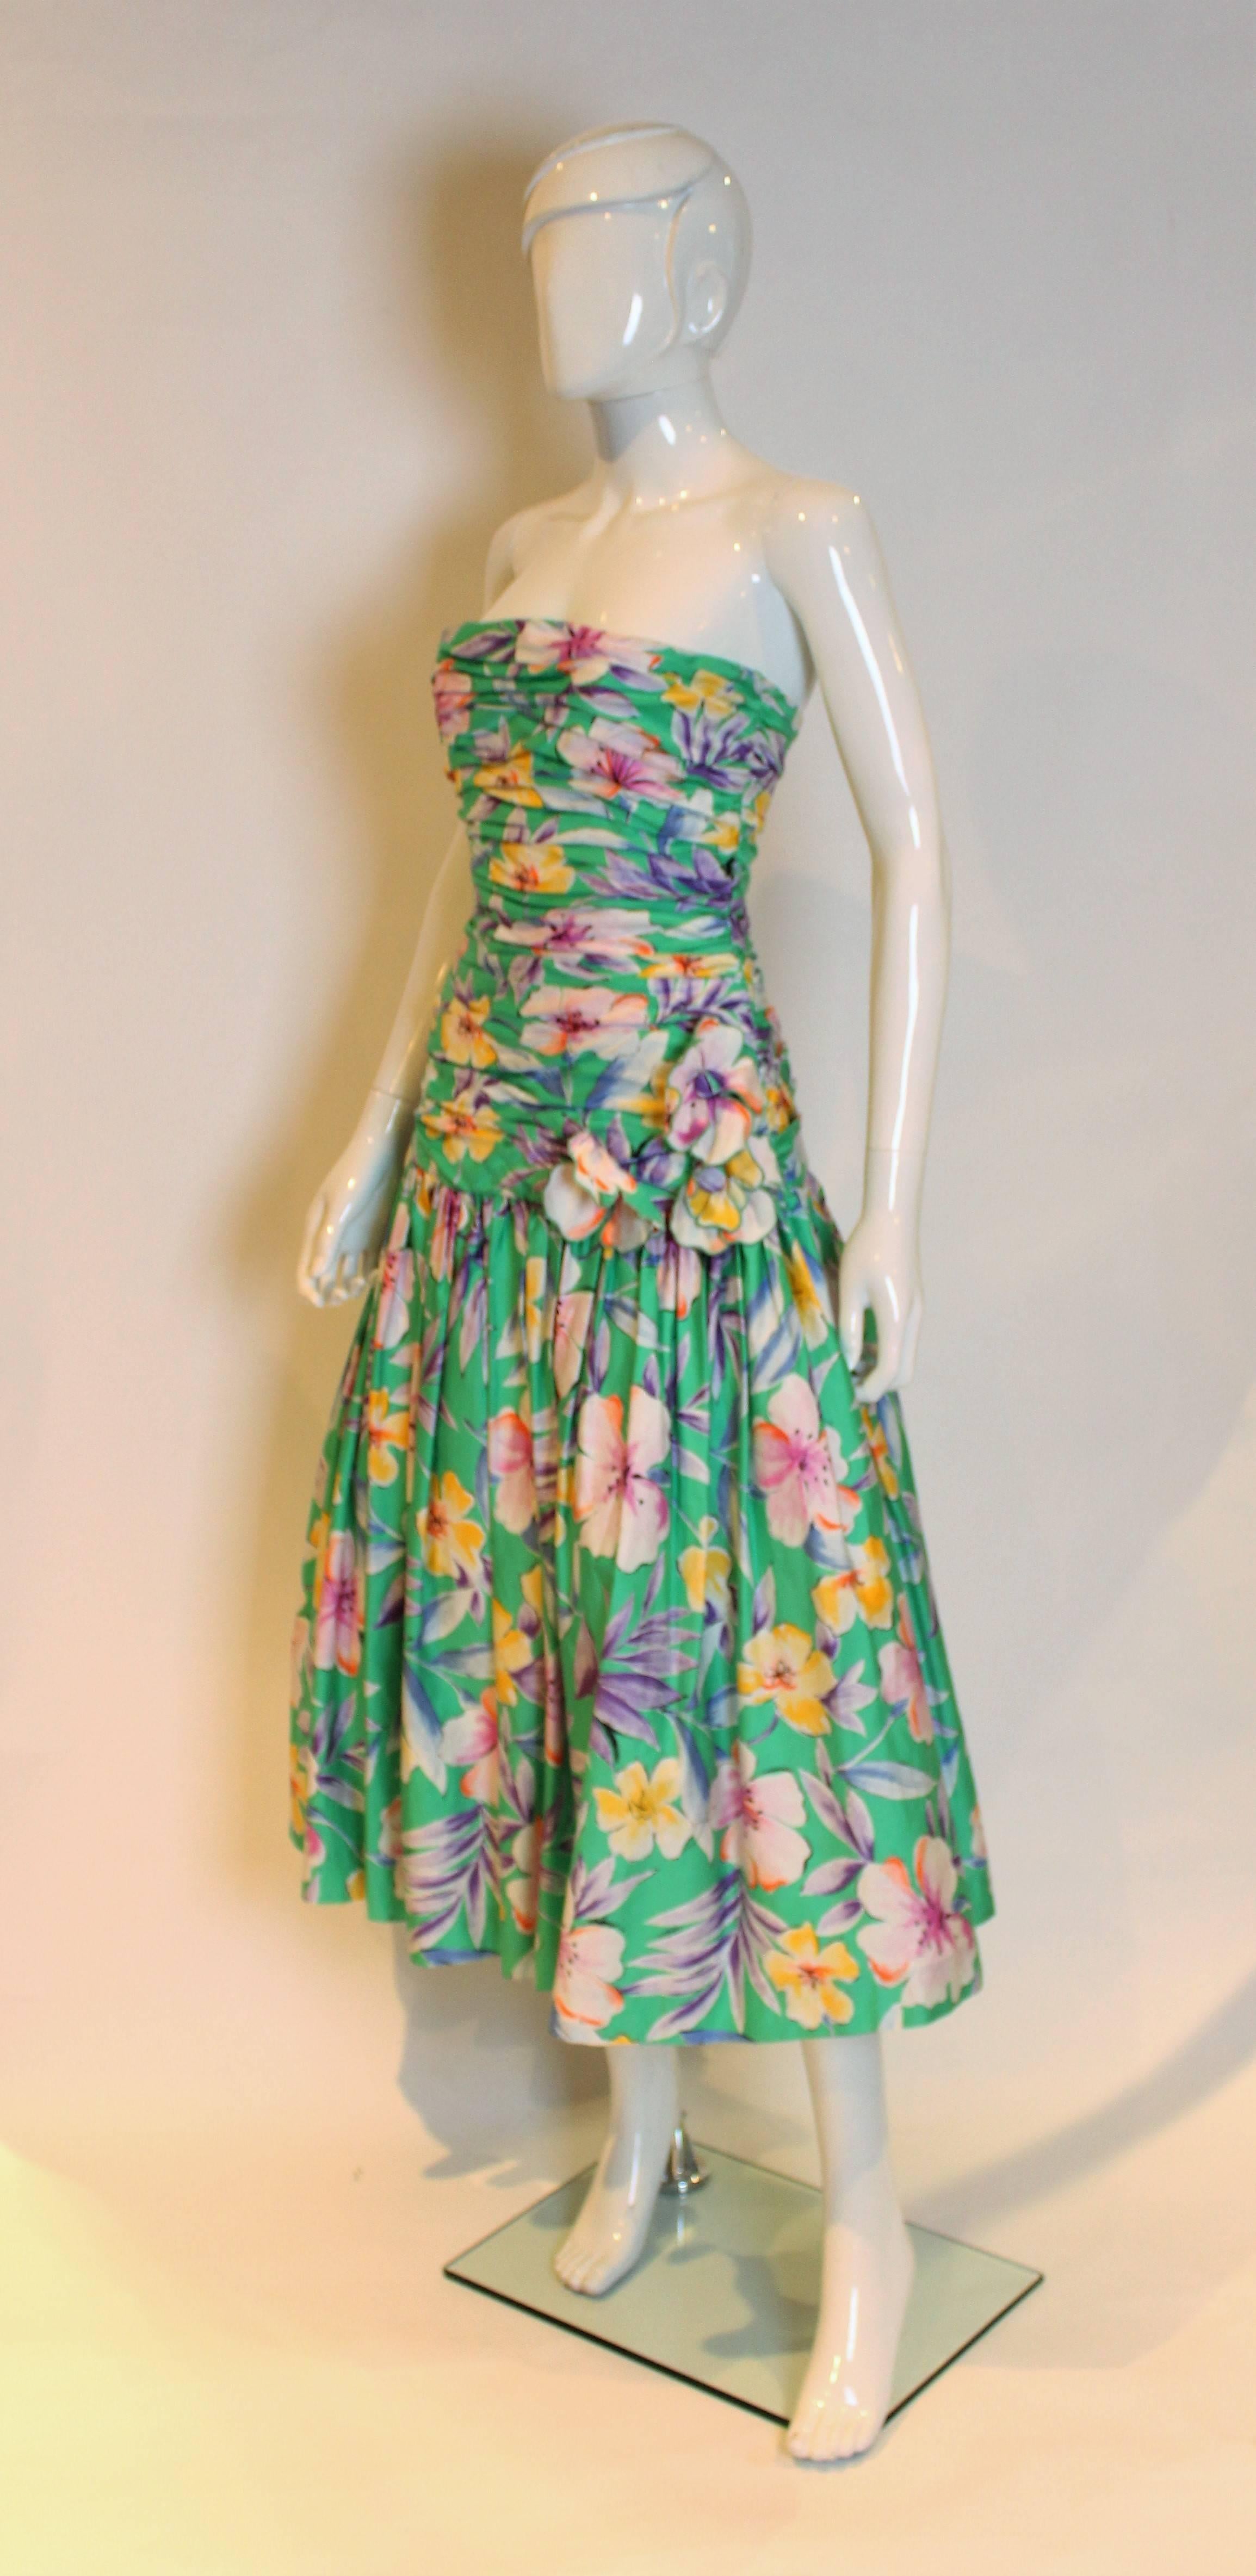 A lovely party dress by American designer Victor Costa. This dress is in a wonderful floral print on a green background. dress has gathering down to hip leval, with three self fabric flowers attached at hip level. The lower skirt has two layers of